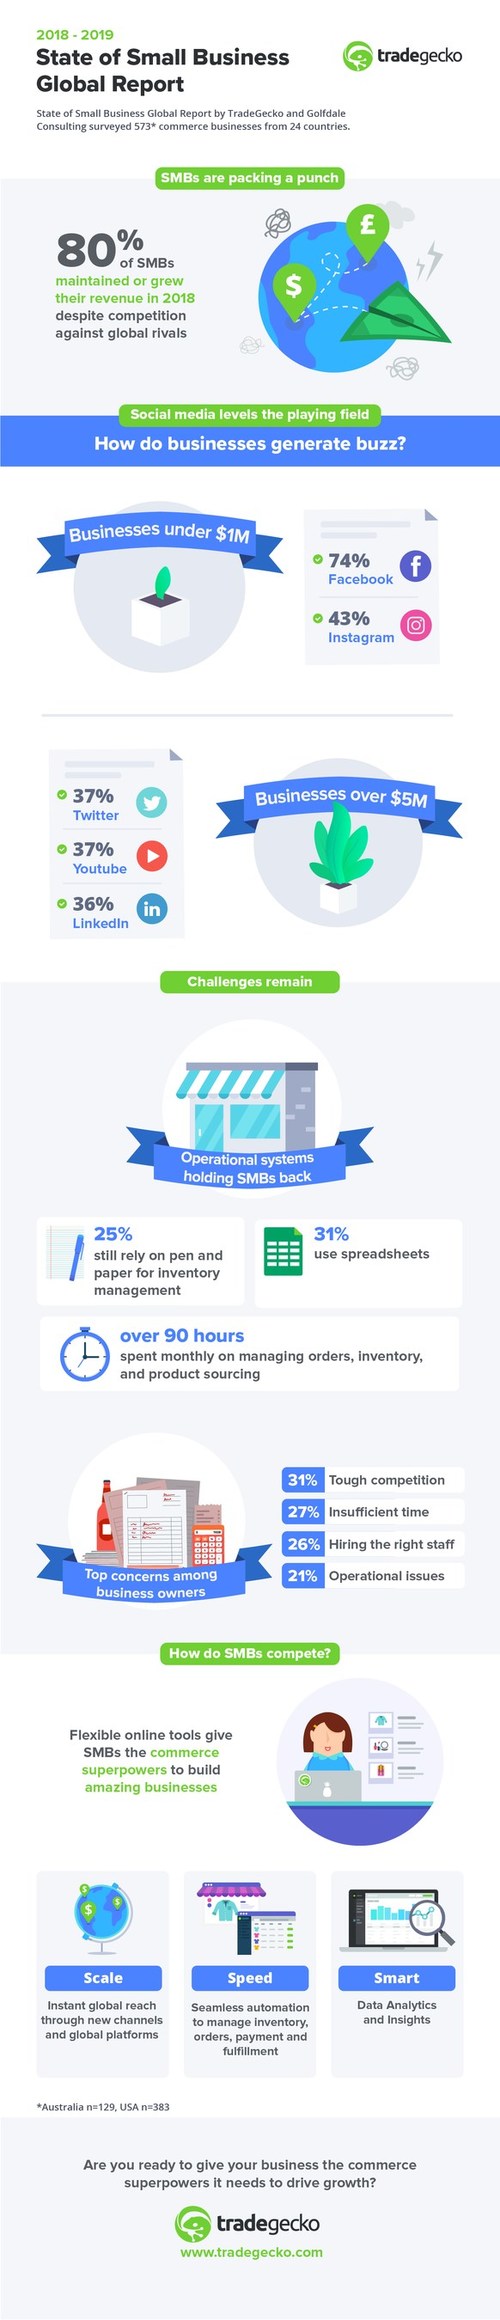 TradeGecko State of Small Business Infographic